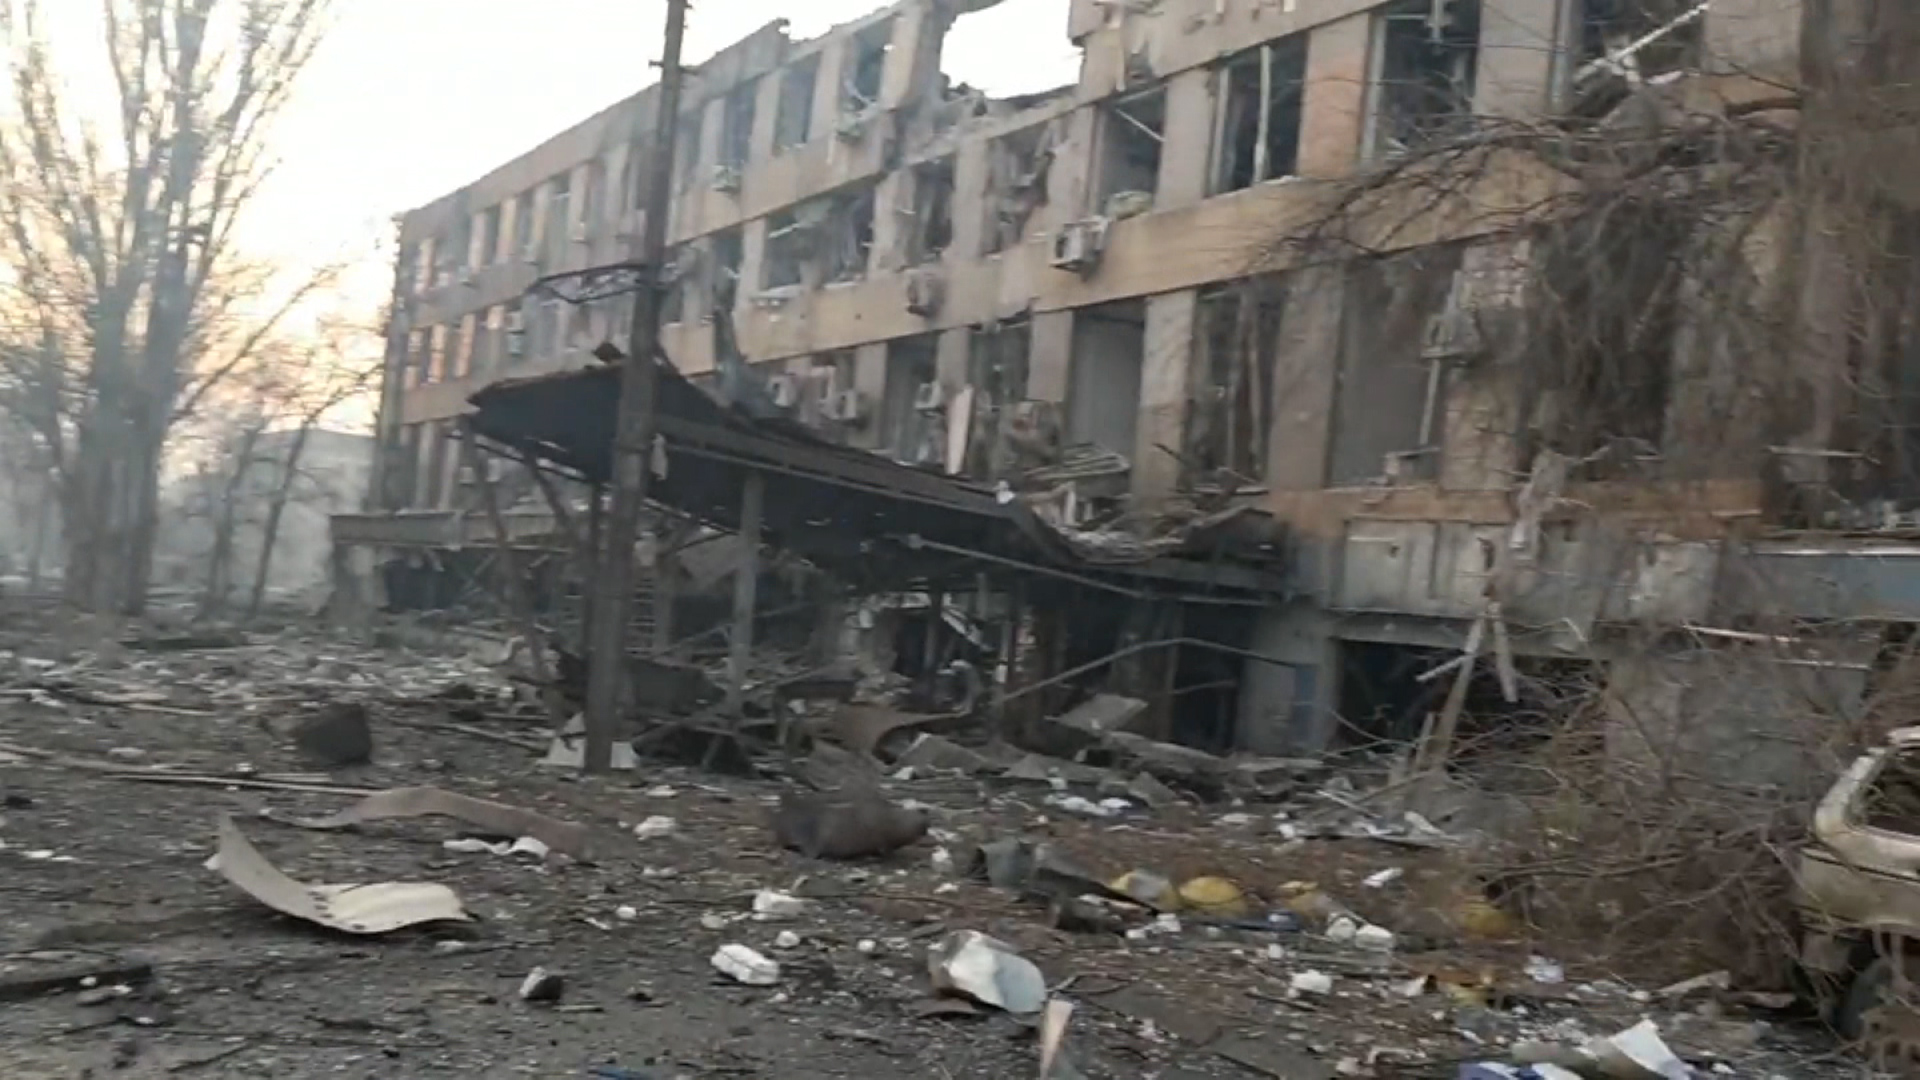 Destruction from a bombing at a city administration building and a university in Mariupol are seen in this image made from video.